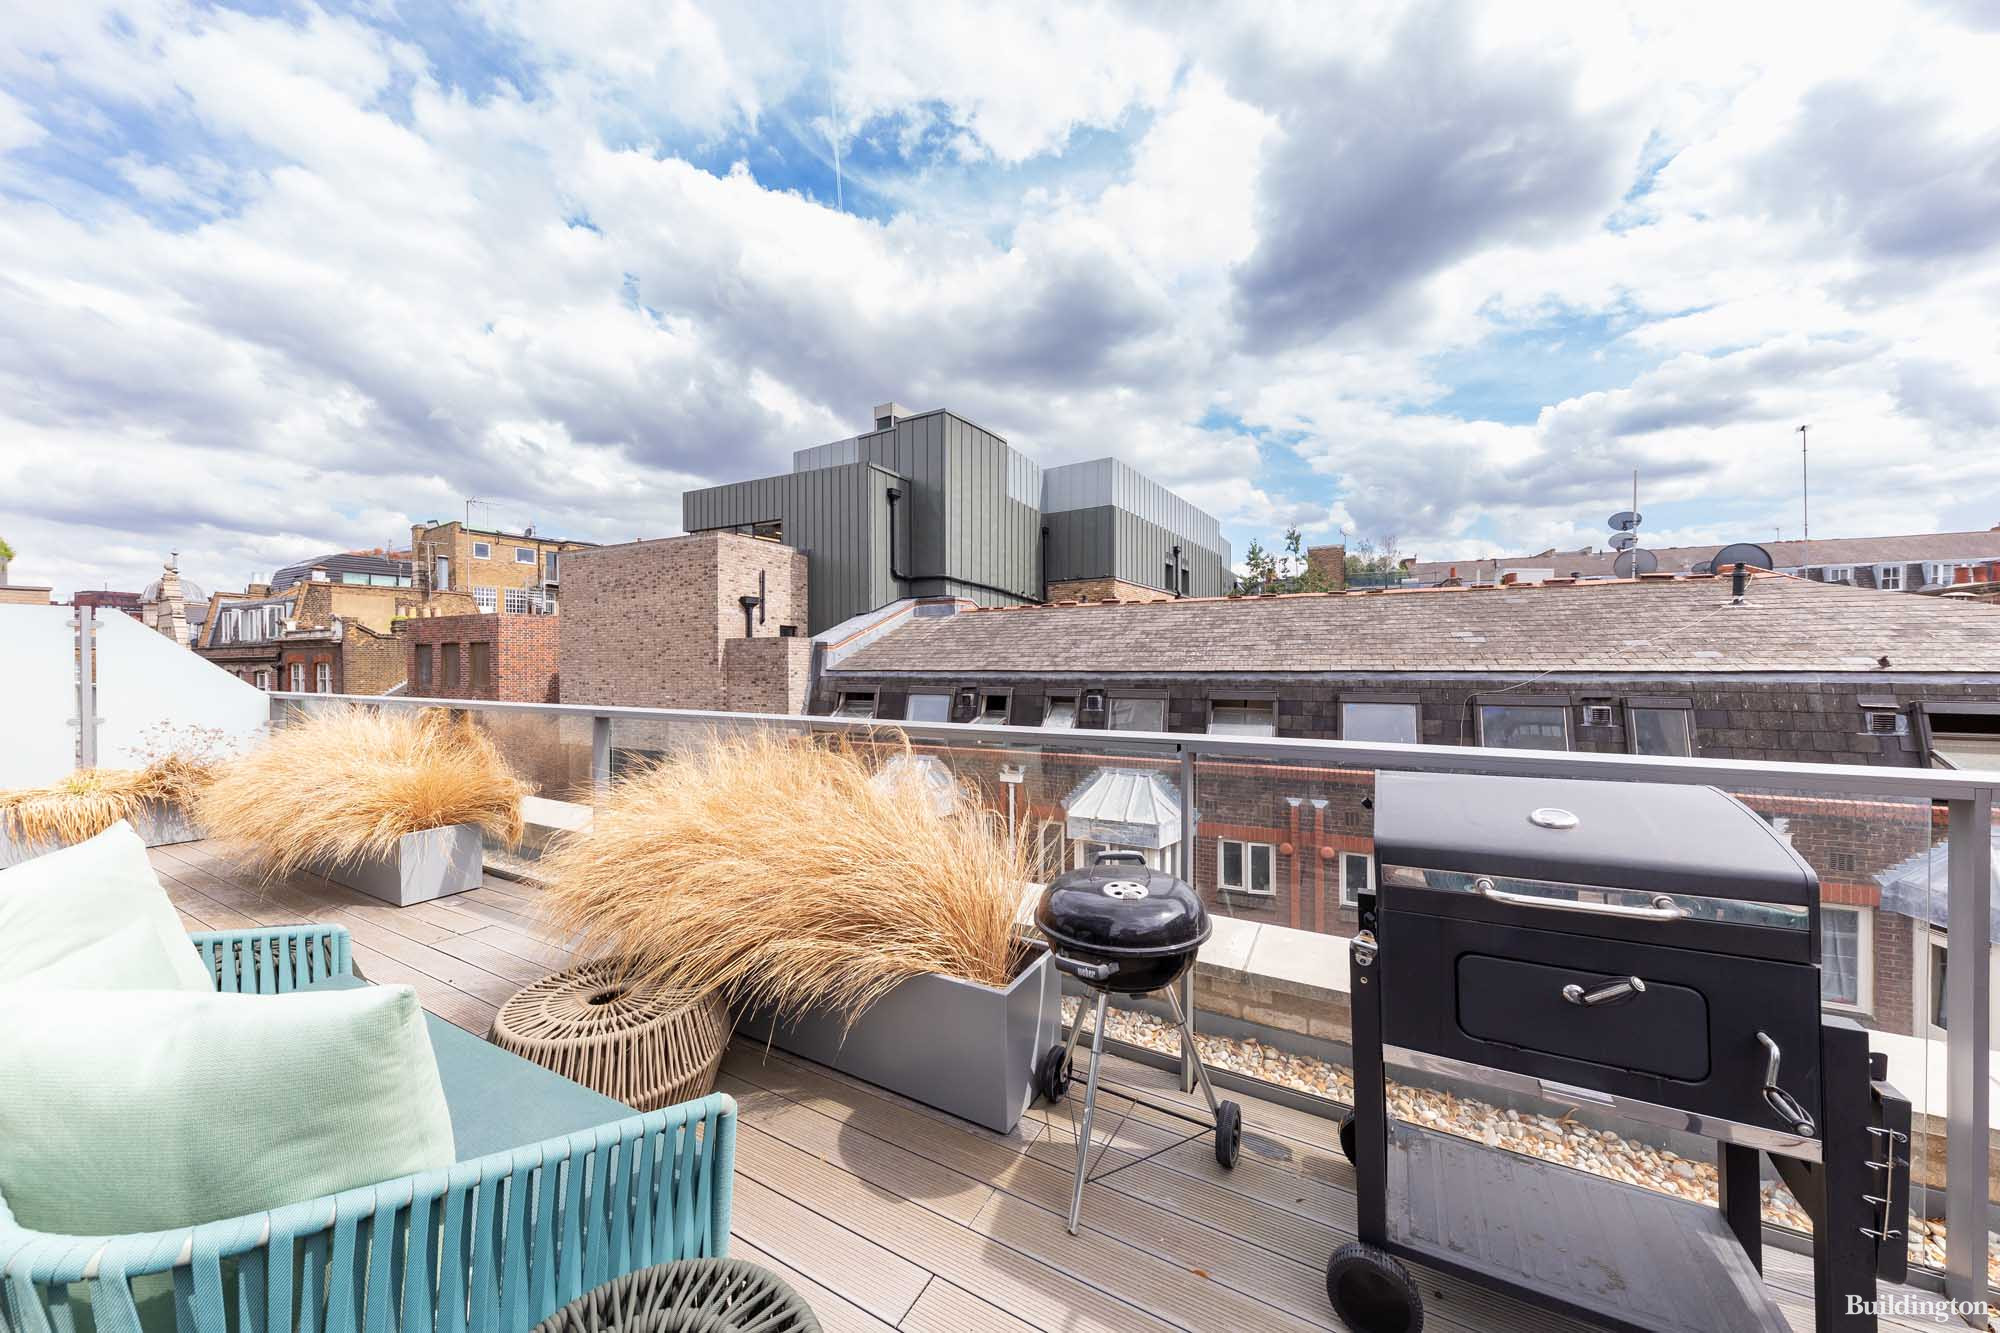 The magnificent duplex 1,574 sq ft penthouse apartment in Soho’s alluring Watch House development is available to rent, furnished, for £3,250 per week via DEXTERS.